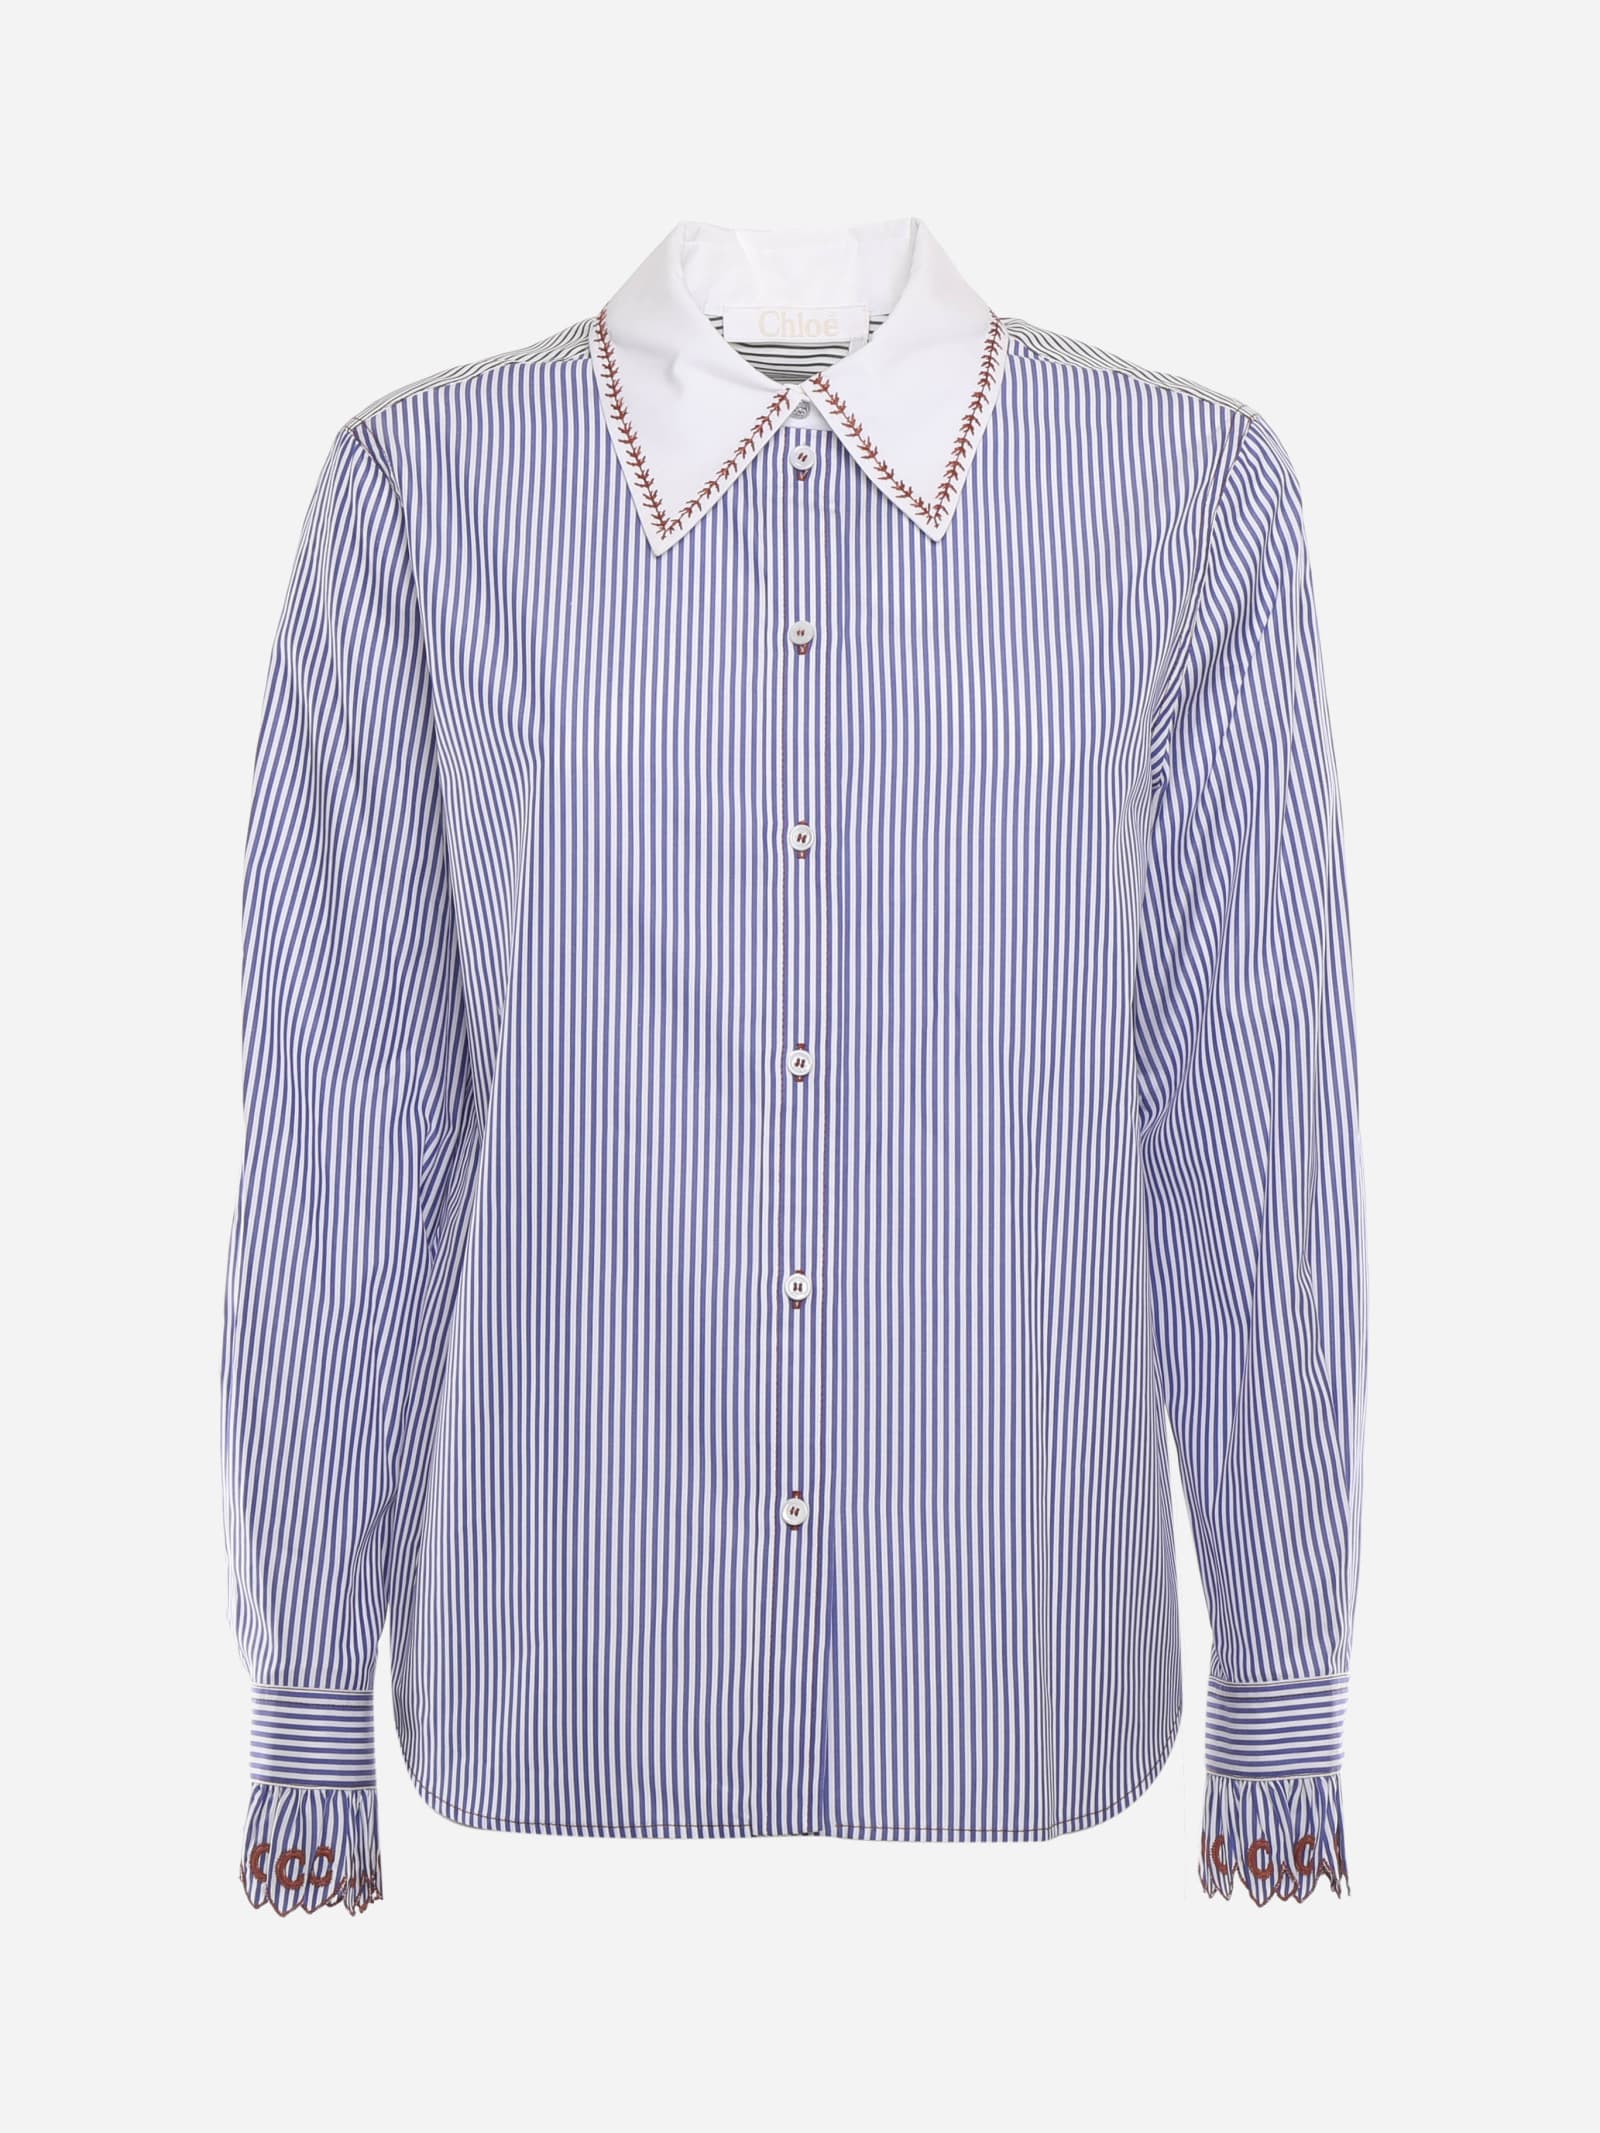 Chloé Striped Cotton Shirt With Contrasting Stitching